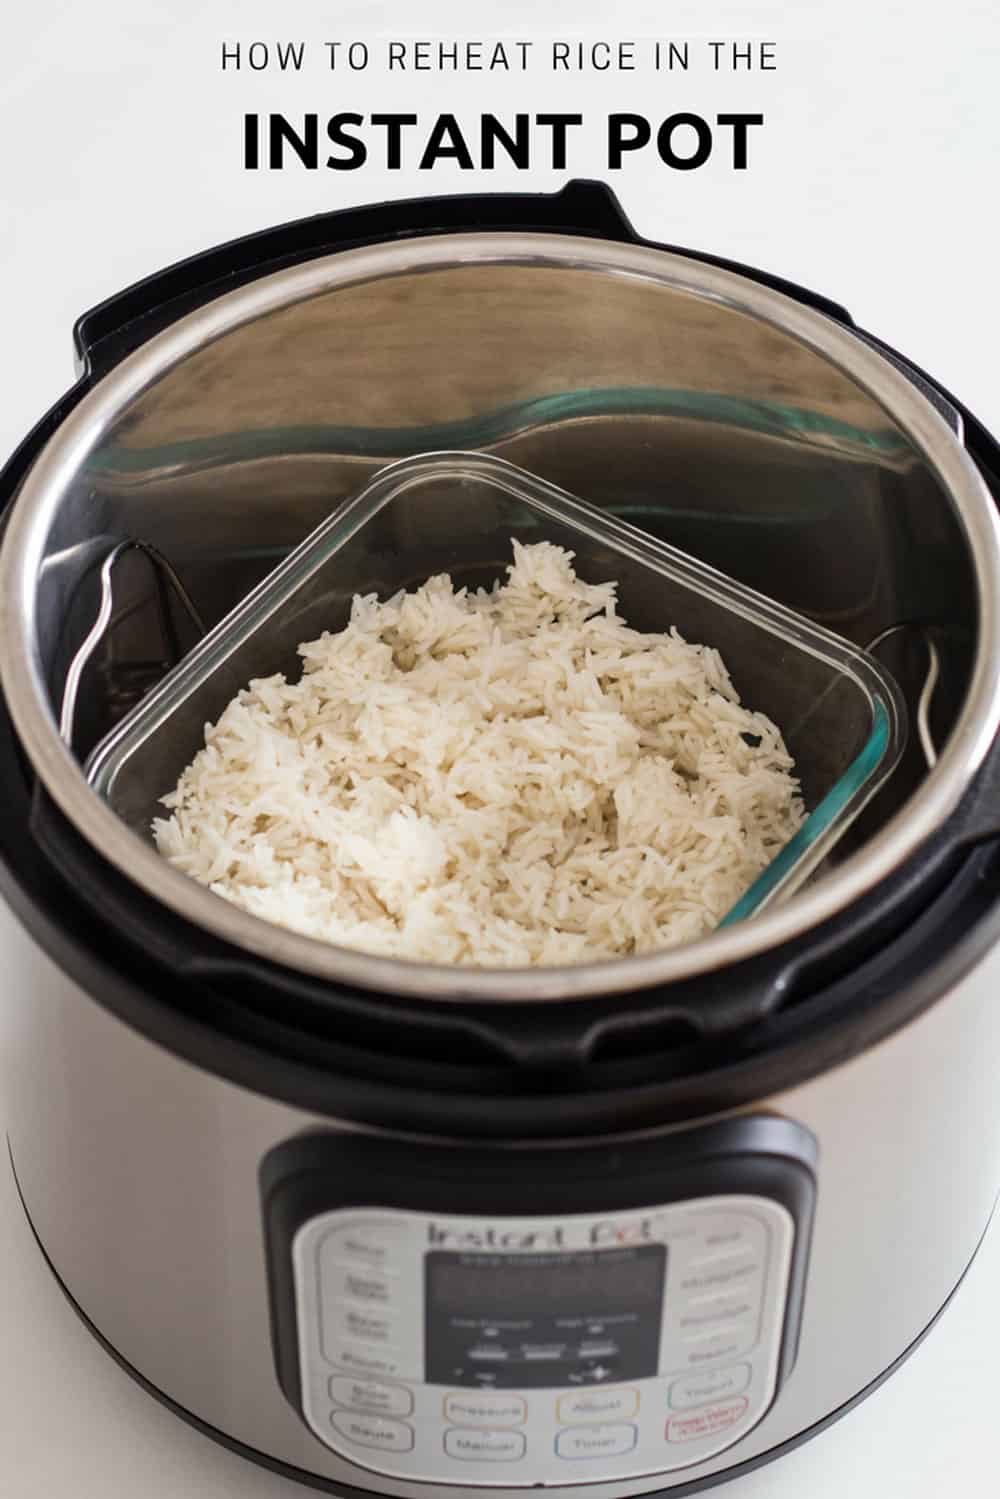 Failproof Instant Pot Rice - Green Healthy Cooking